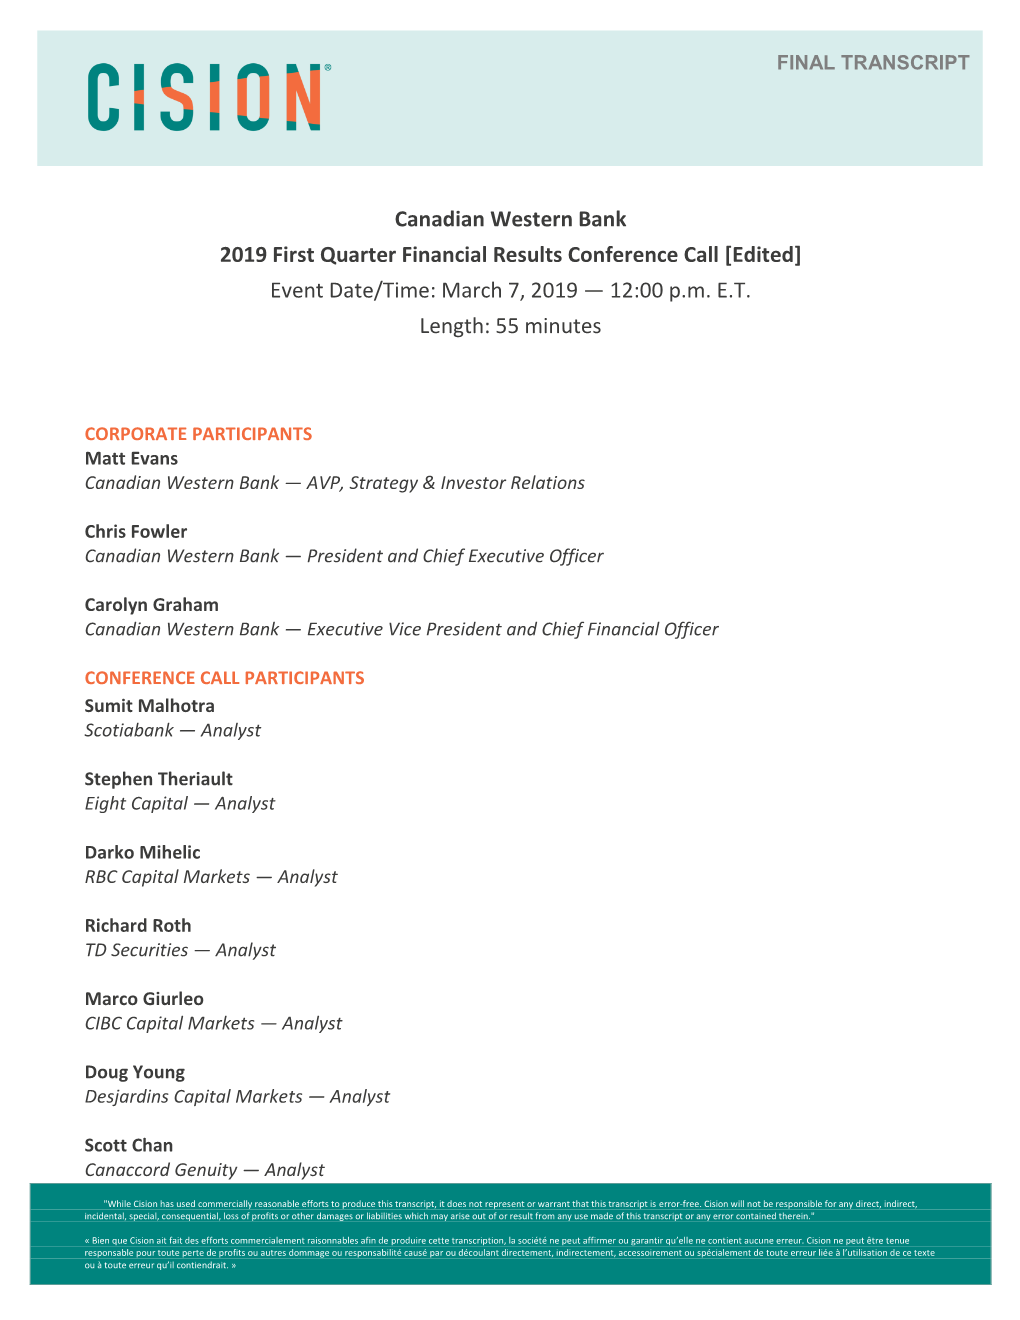 Canadian Western Bank 2019 First Quarter Financial Results Conference Call [Edited] Event Date/Time: March 7, 2019 — 12:00 P.M